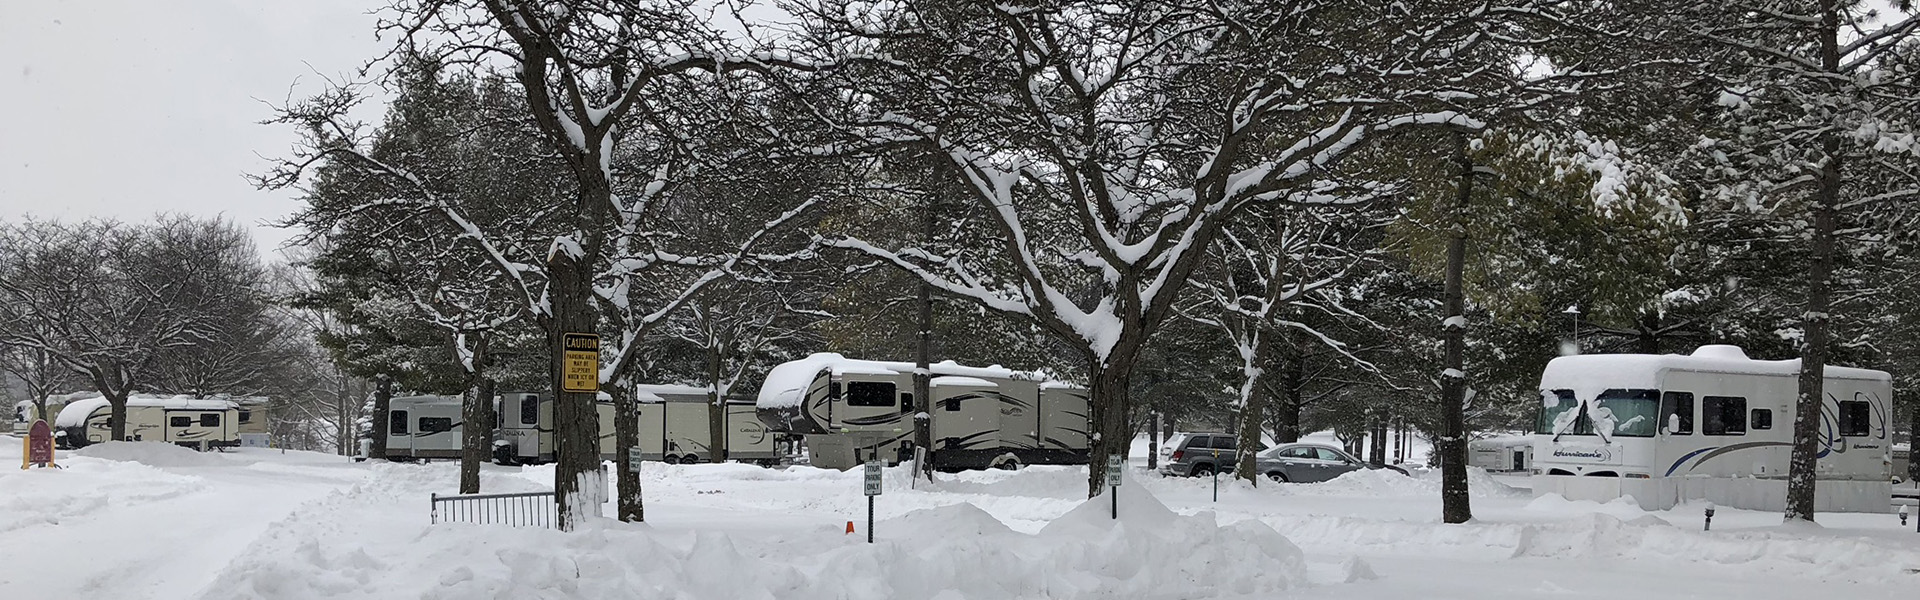 Camping Under Snow